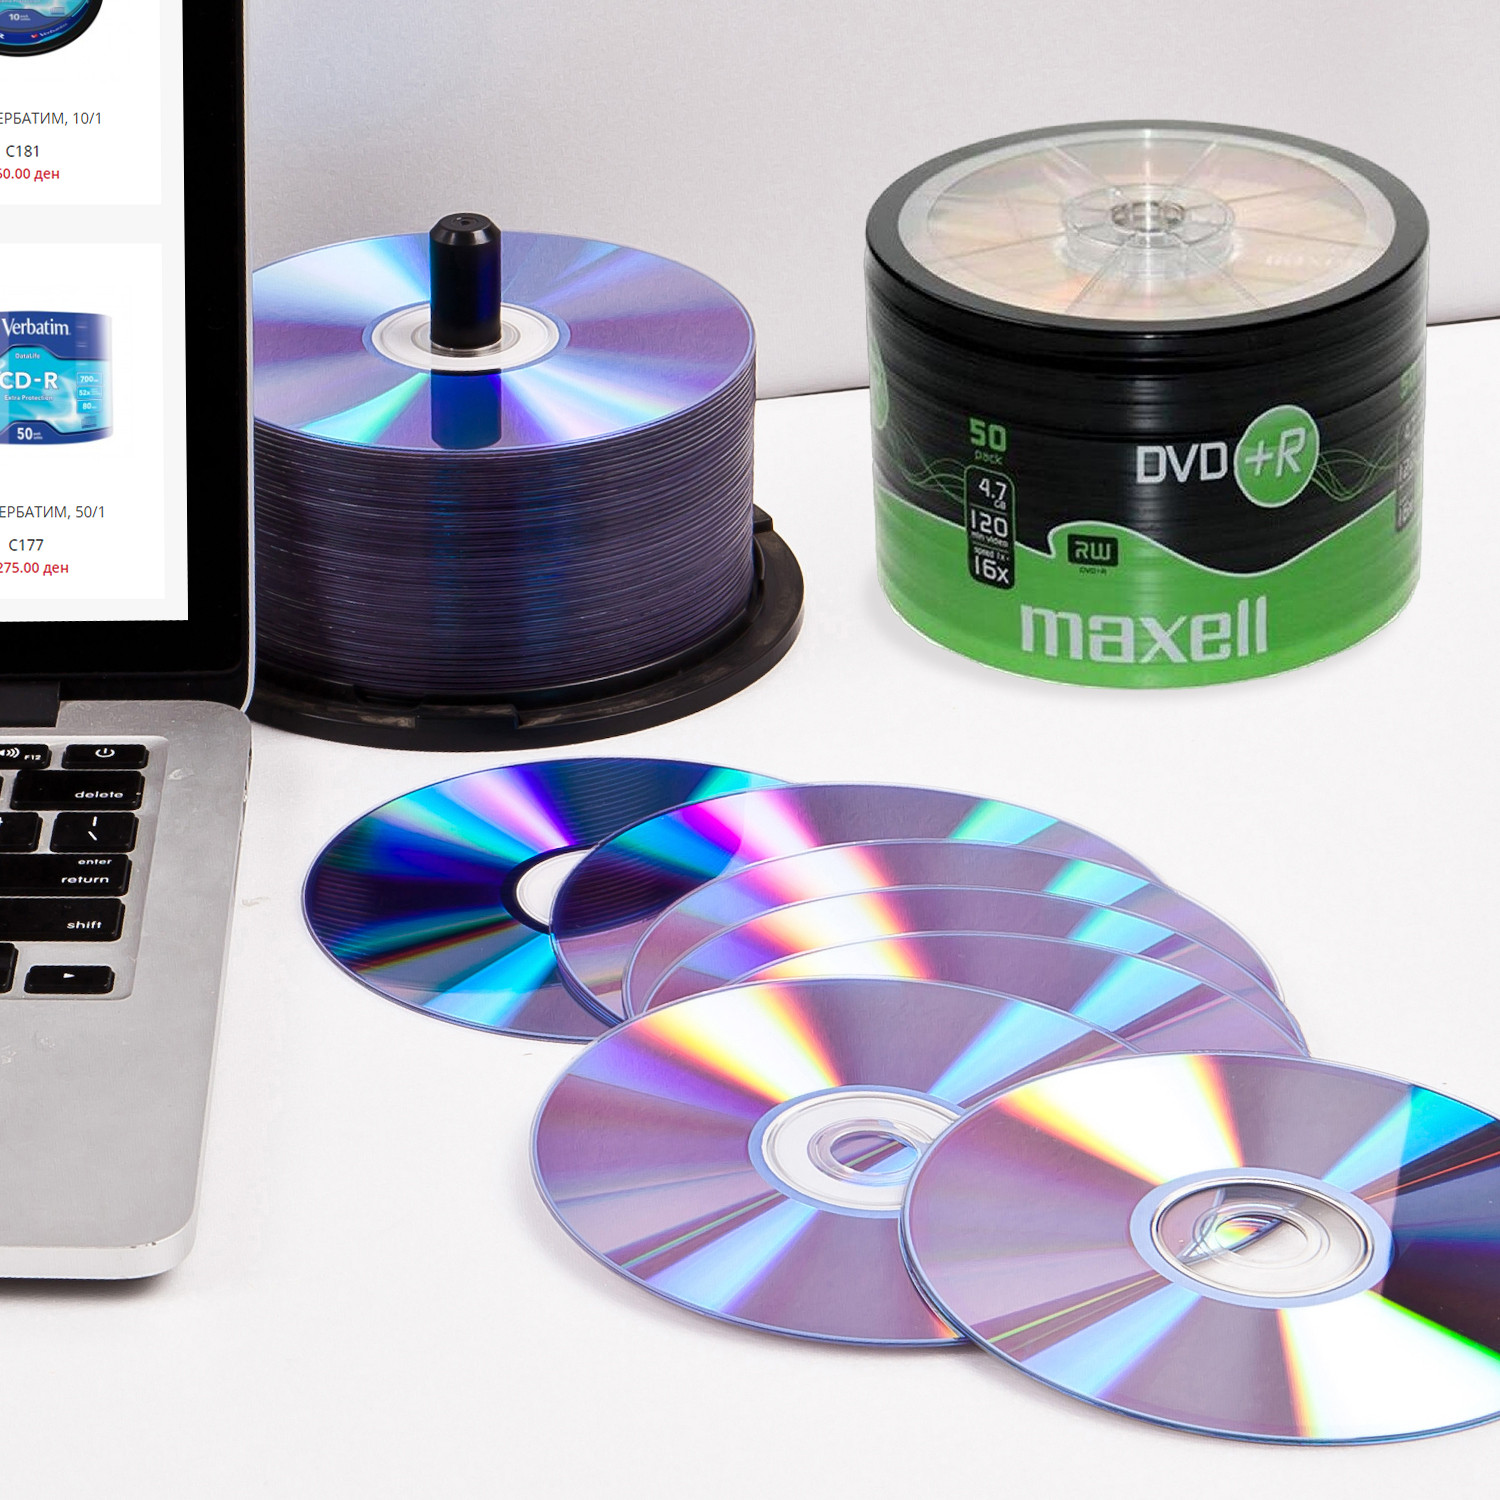 CD-R and CD boxes